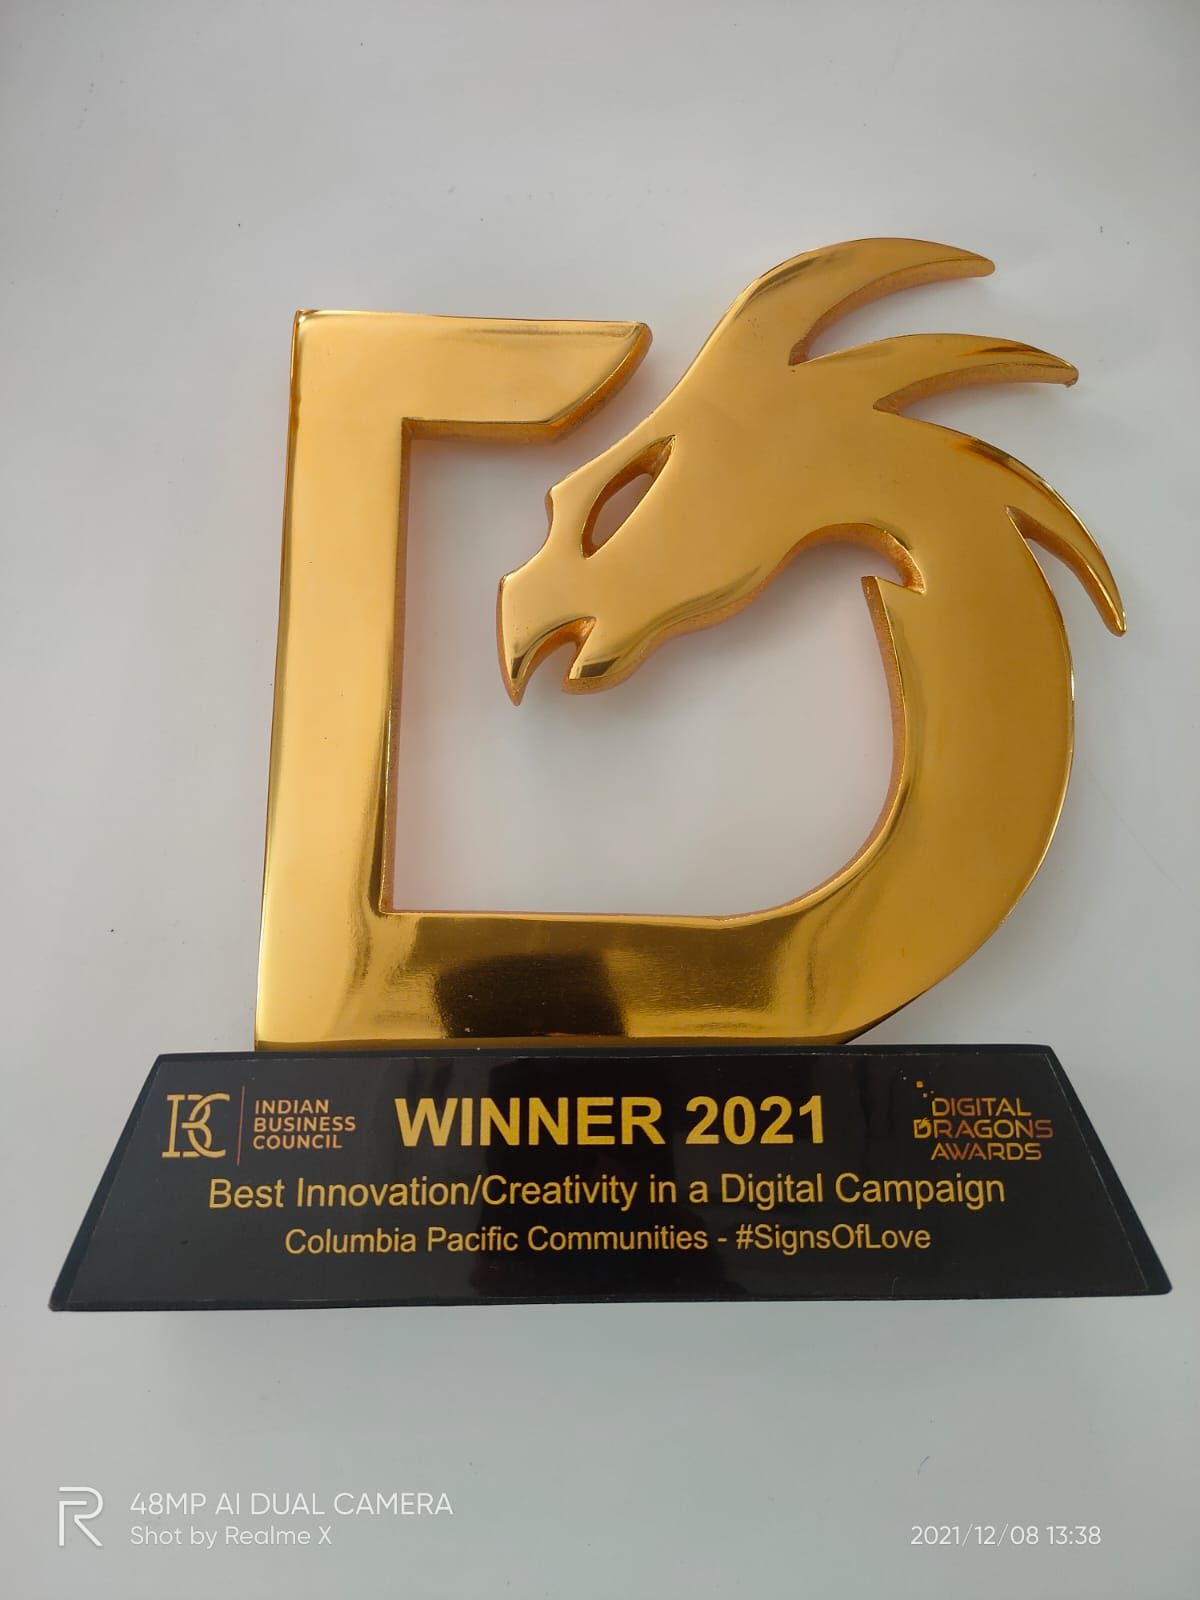 Columbia Pacific Comunities bags Best Innovation/Creativity in a Digital Campaign at Digital Dragon Awards 2021